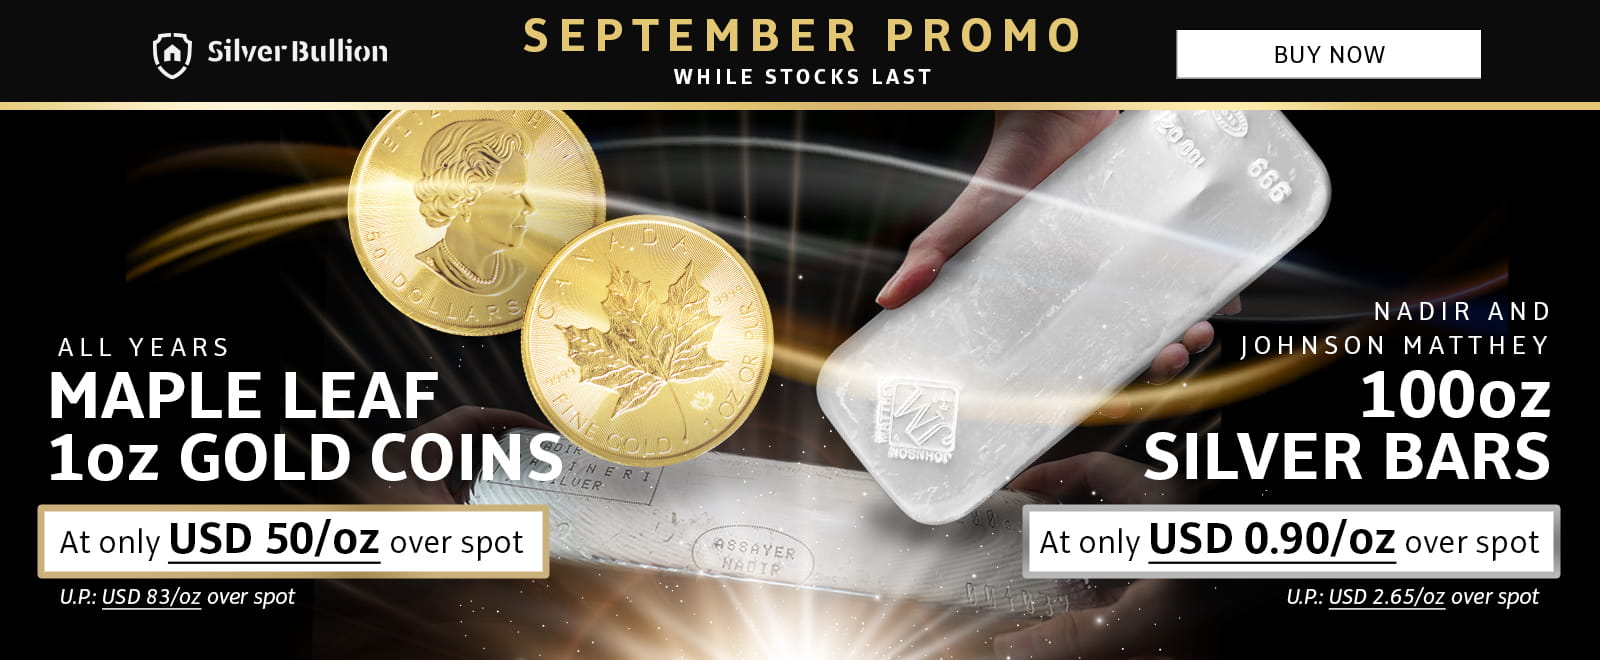 September 2023 Promo - 1 oz Maple Leaf Gold Coins (All Years) at only 50 USD / oz over spot & 100 oz Silver Bars from Nadir and Johnson Matthey at only 0.90 USD / oz over spot